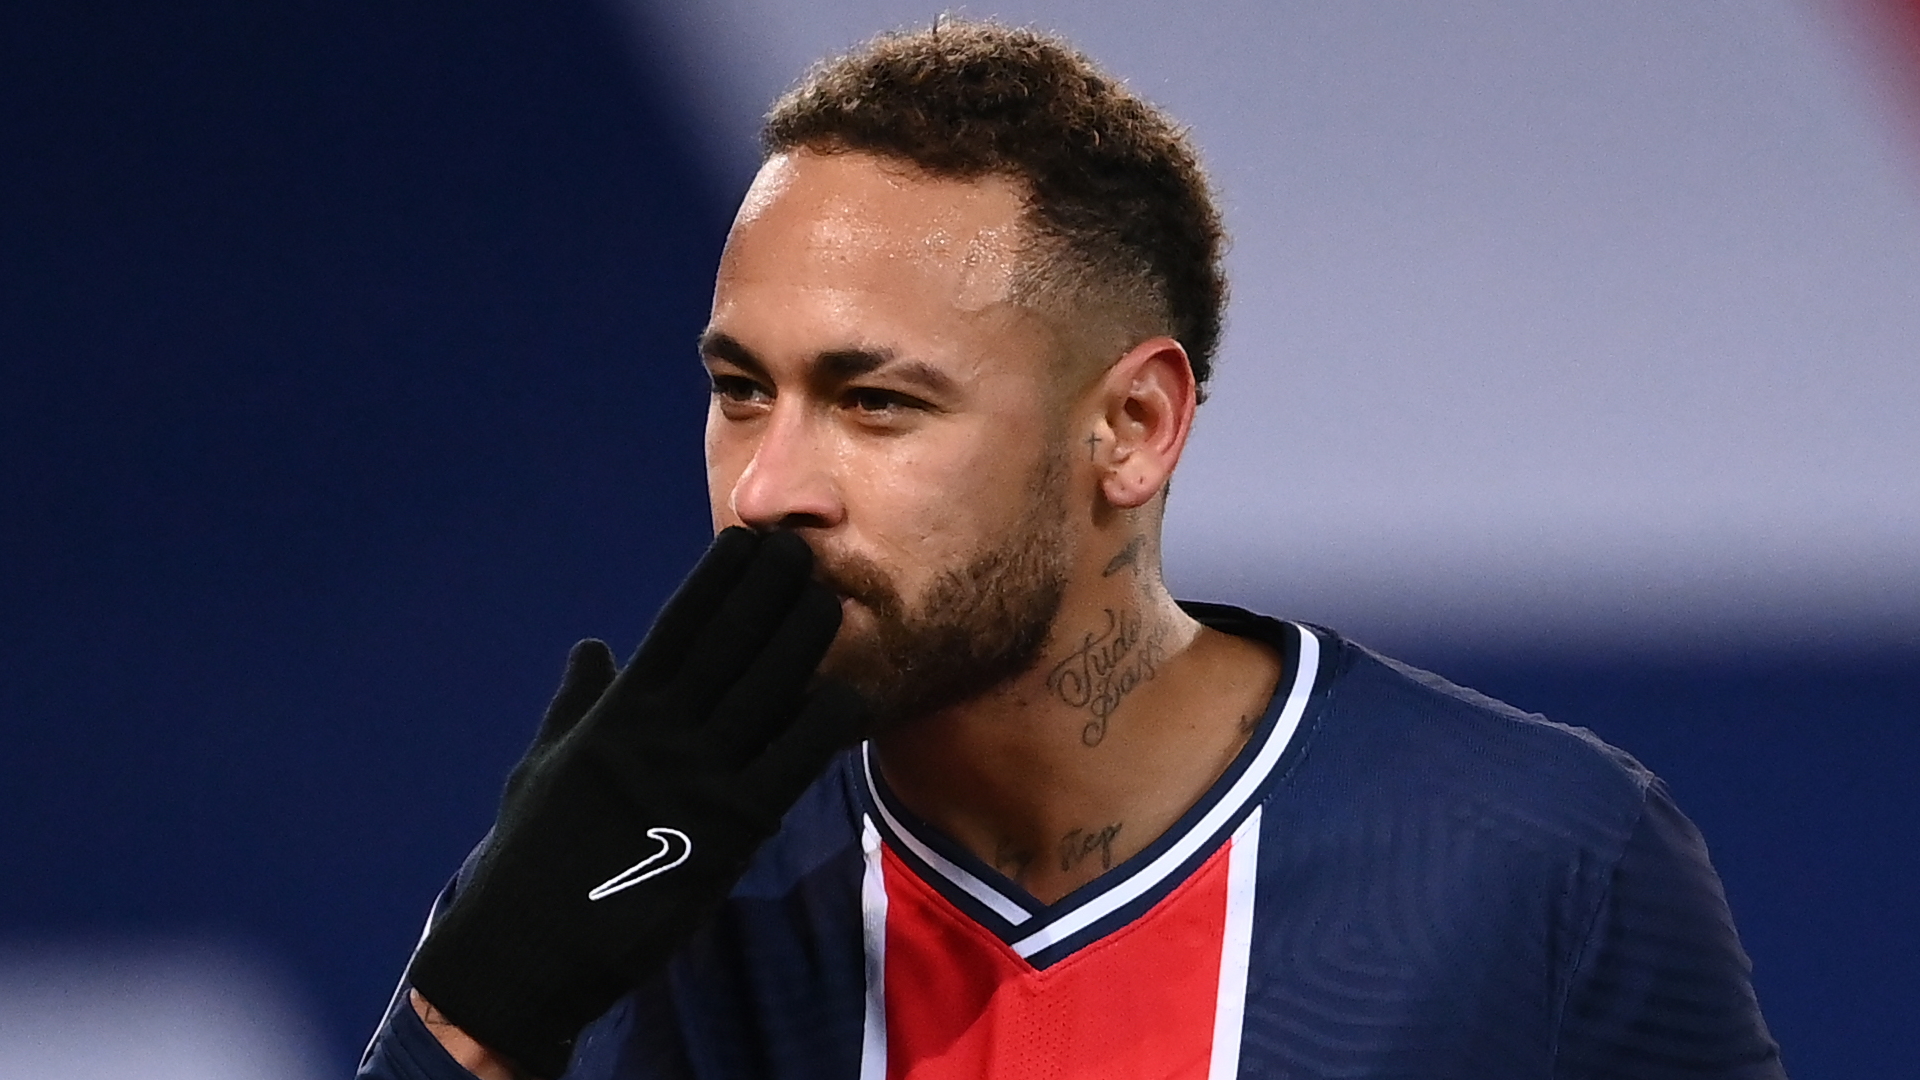 New Neymar contract at PSG is ‘great news’, says Mbappe